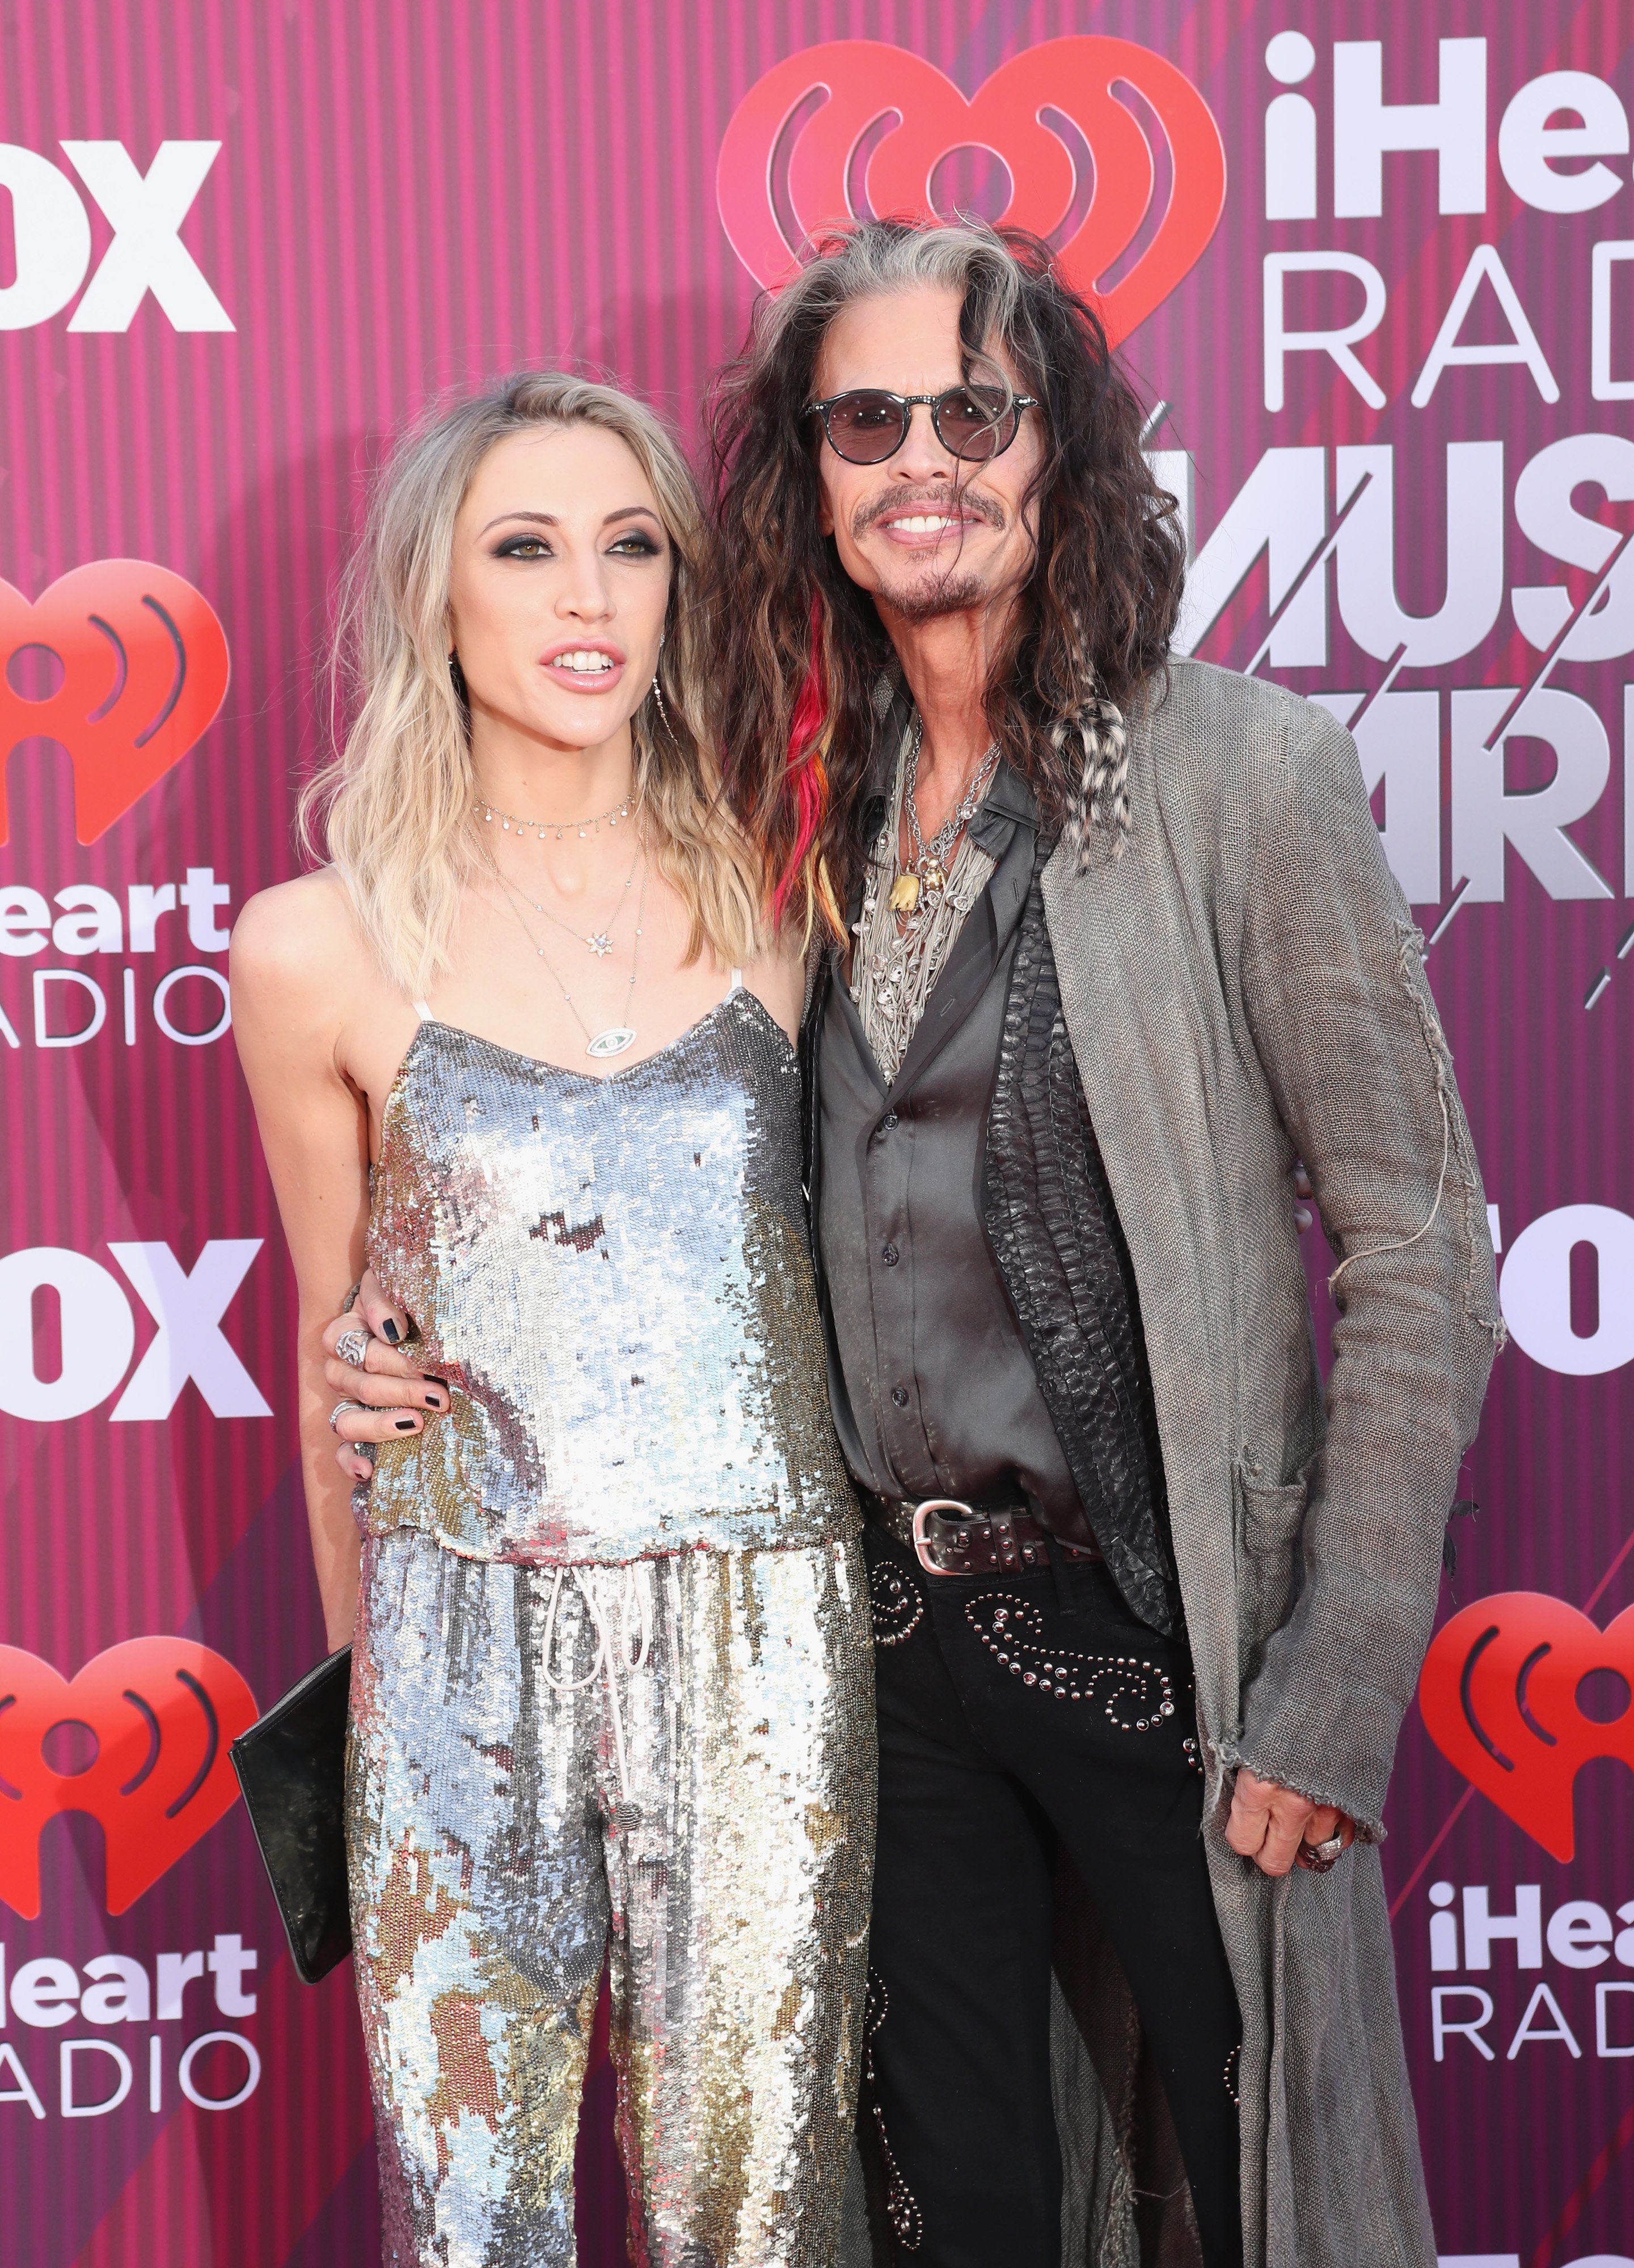 Aimee Preston and Steven Tyler at the 2019 iHeartRadio Music Awards on March 14, 2019 | Photo: GettyImages